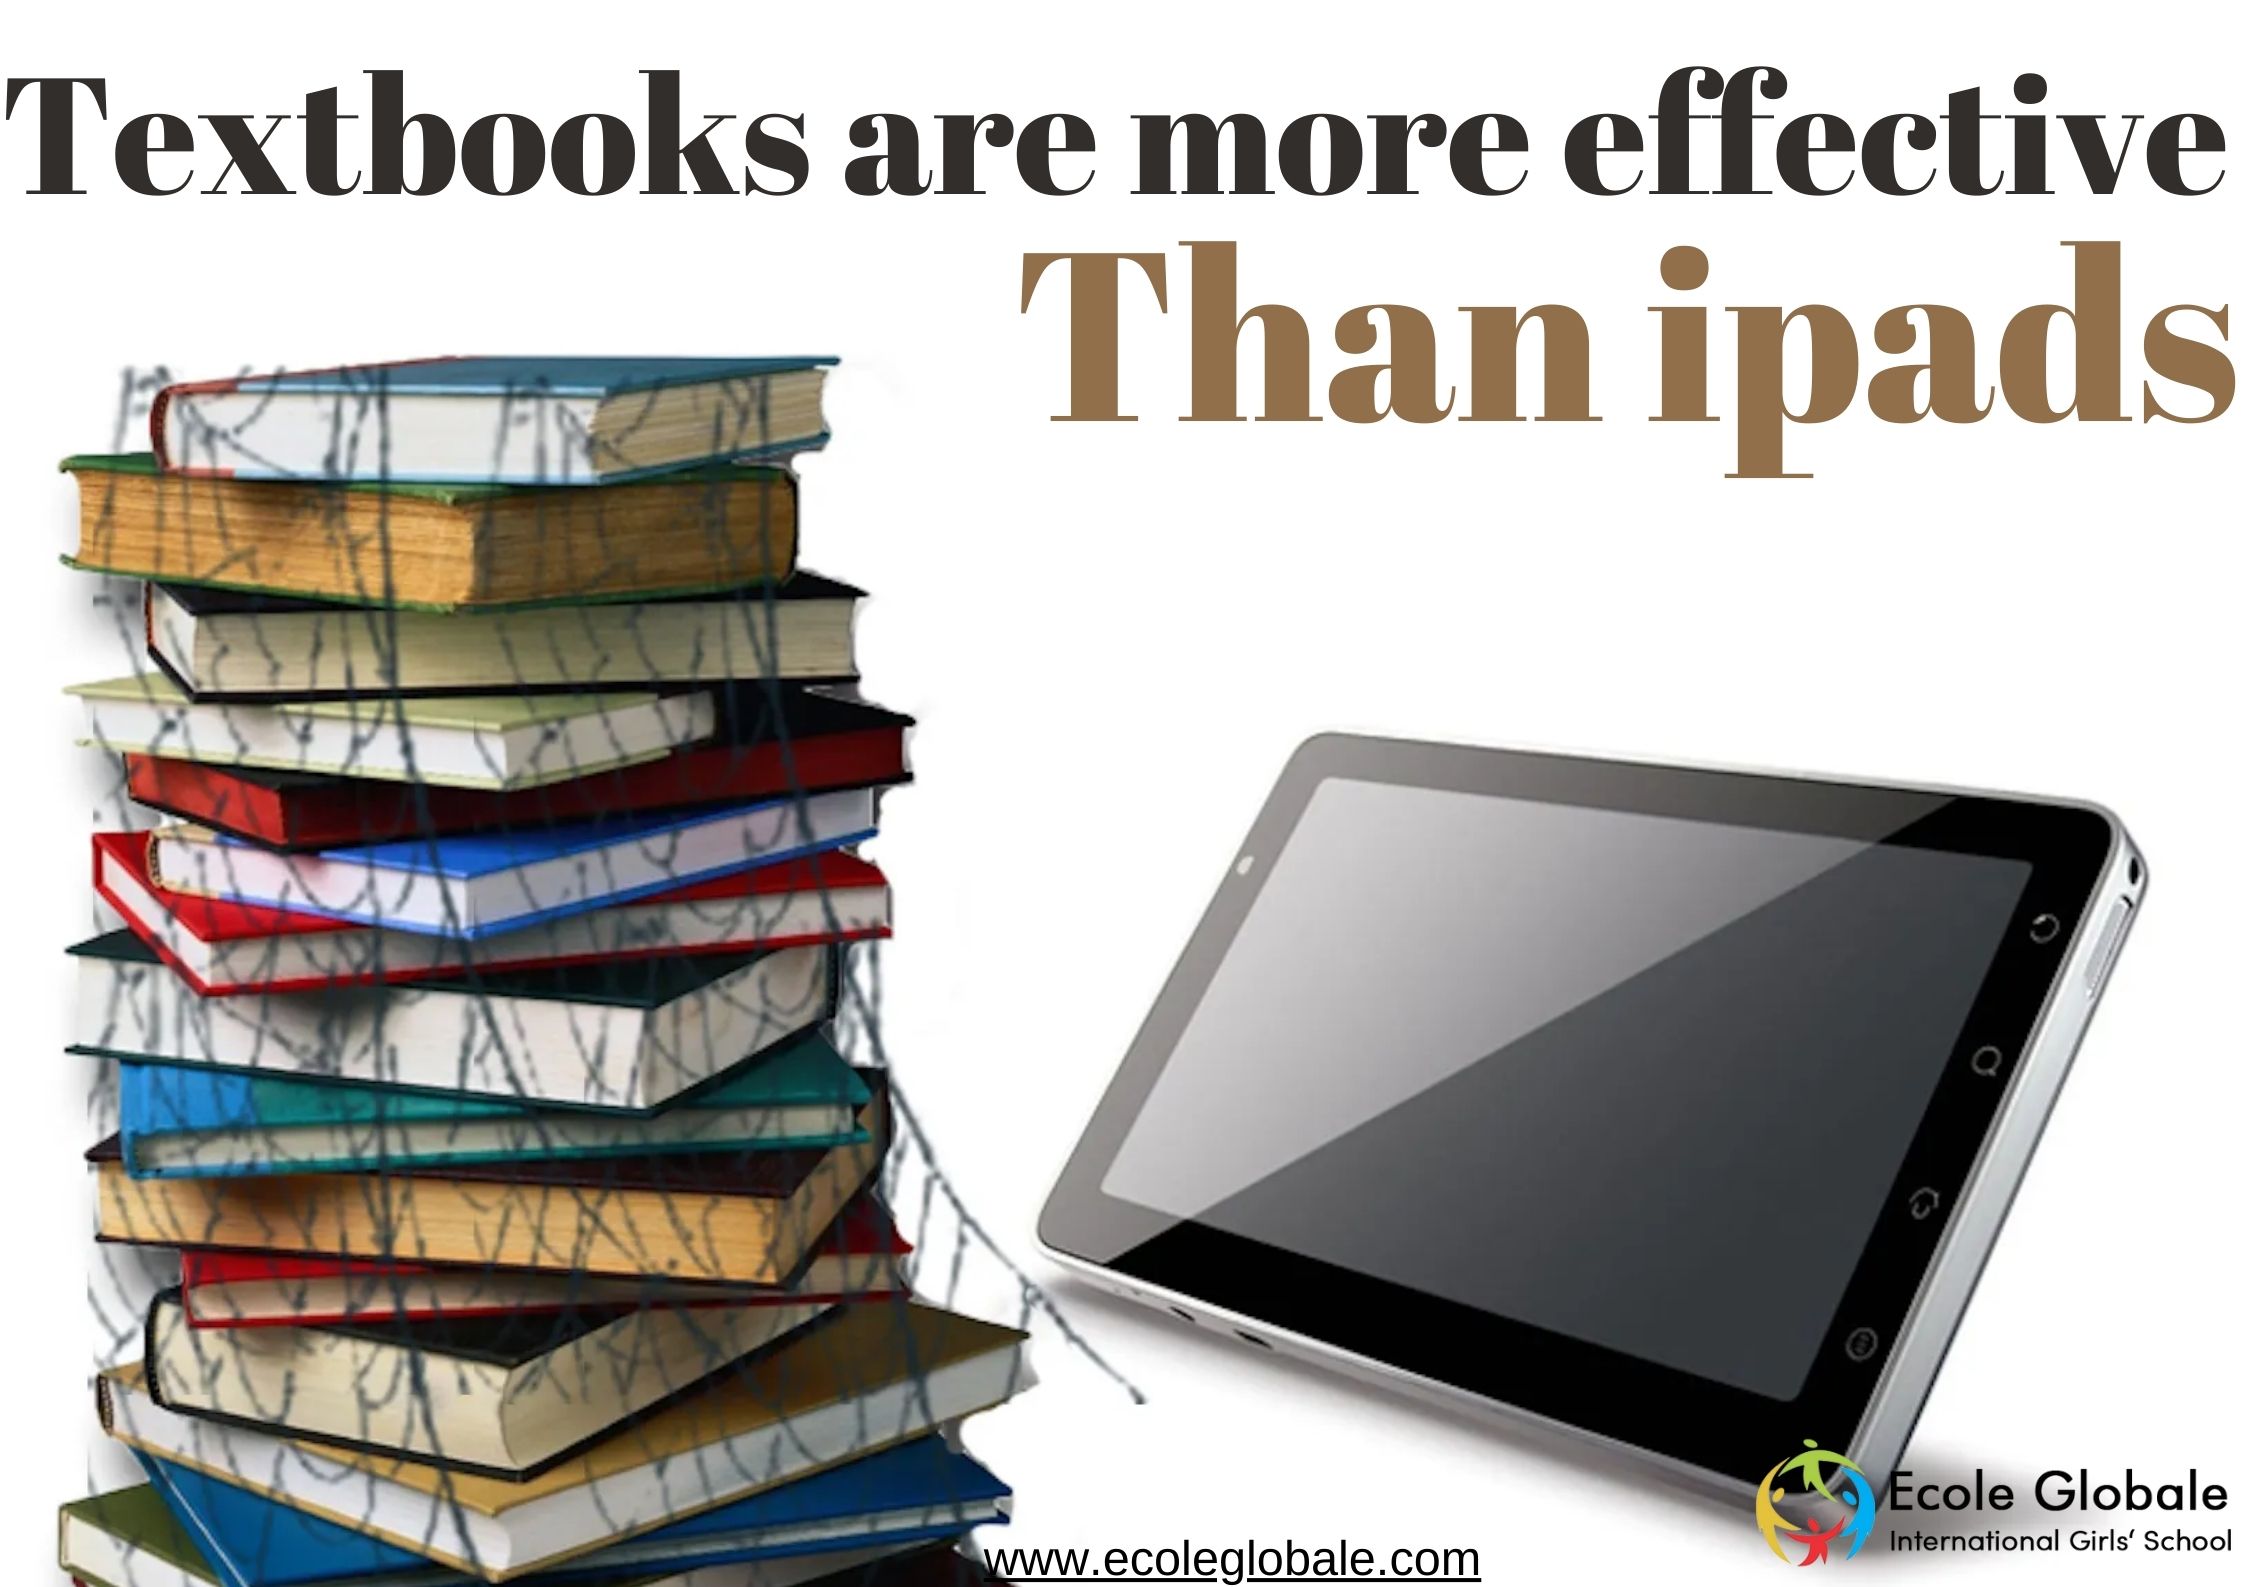 TEXTBOOKS ARE MORE EFFECTIVE THAN IPADS